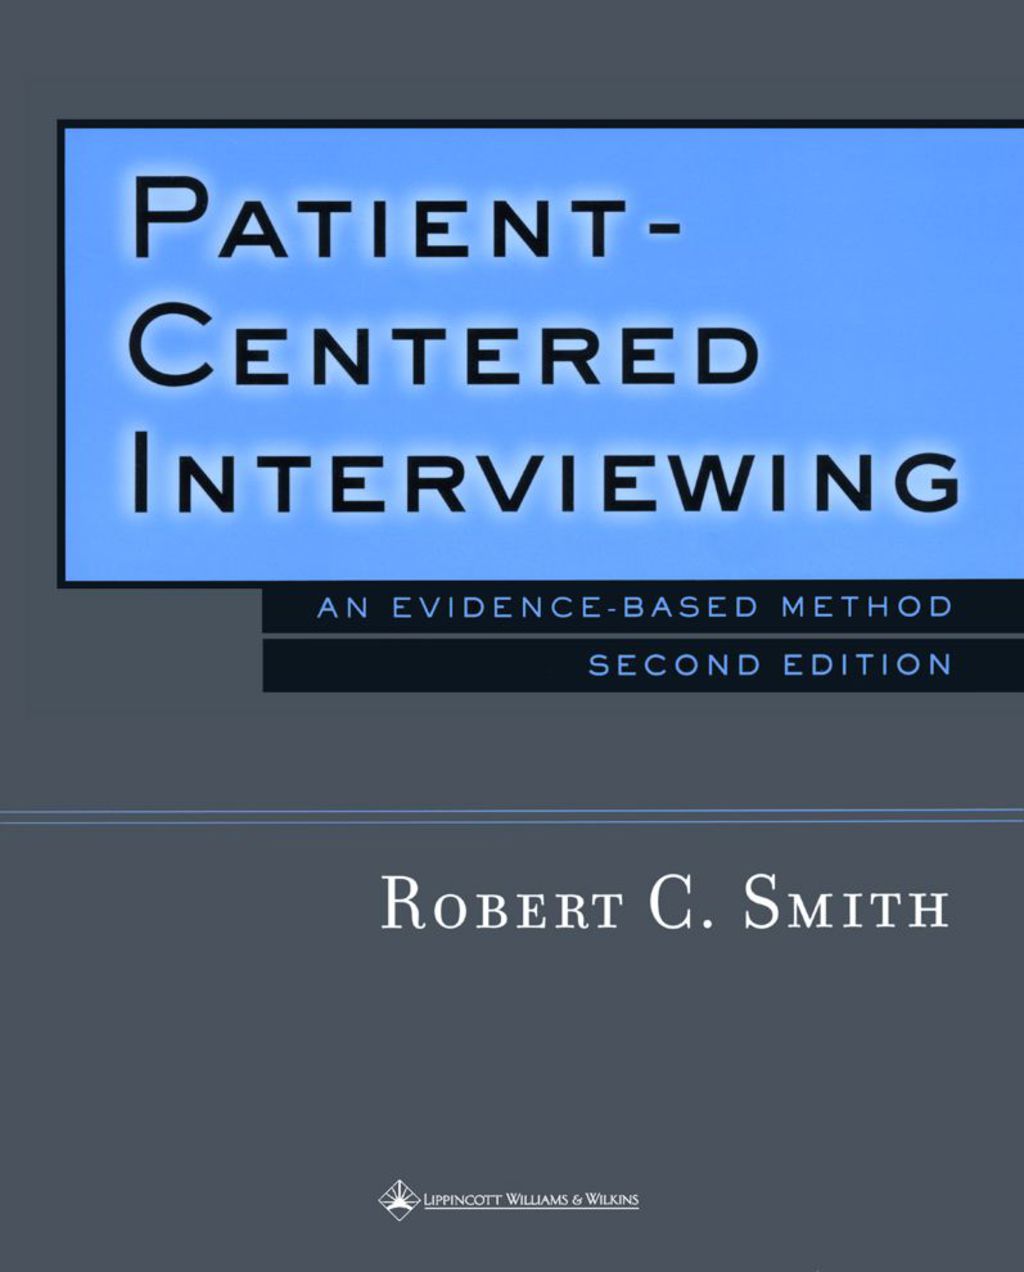 Patient-Centered Interviewing: An Evidence-Based Method - 2nd Edition (eBook)